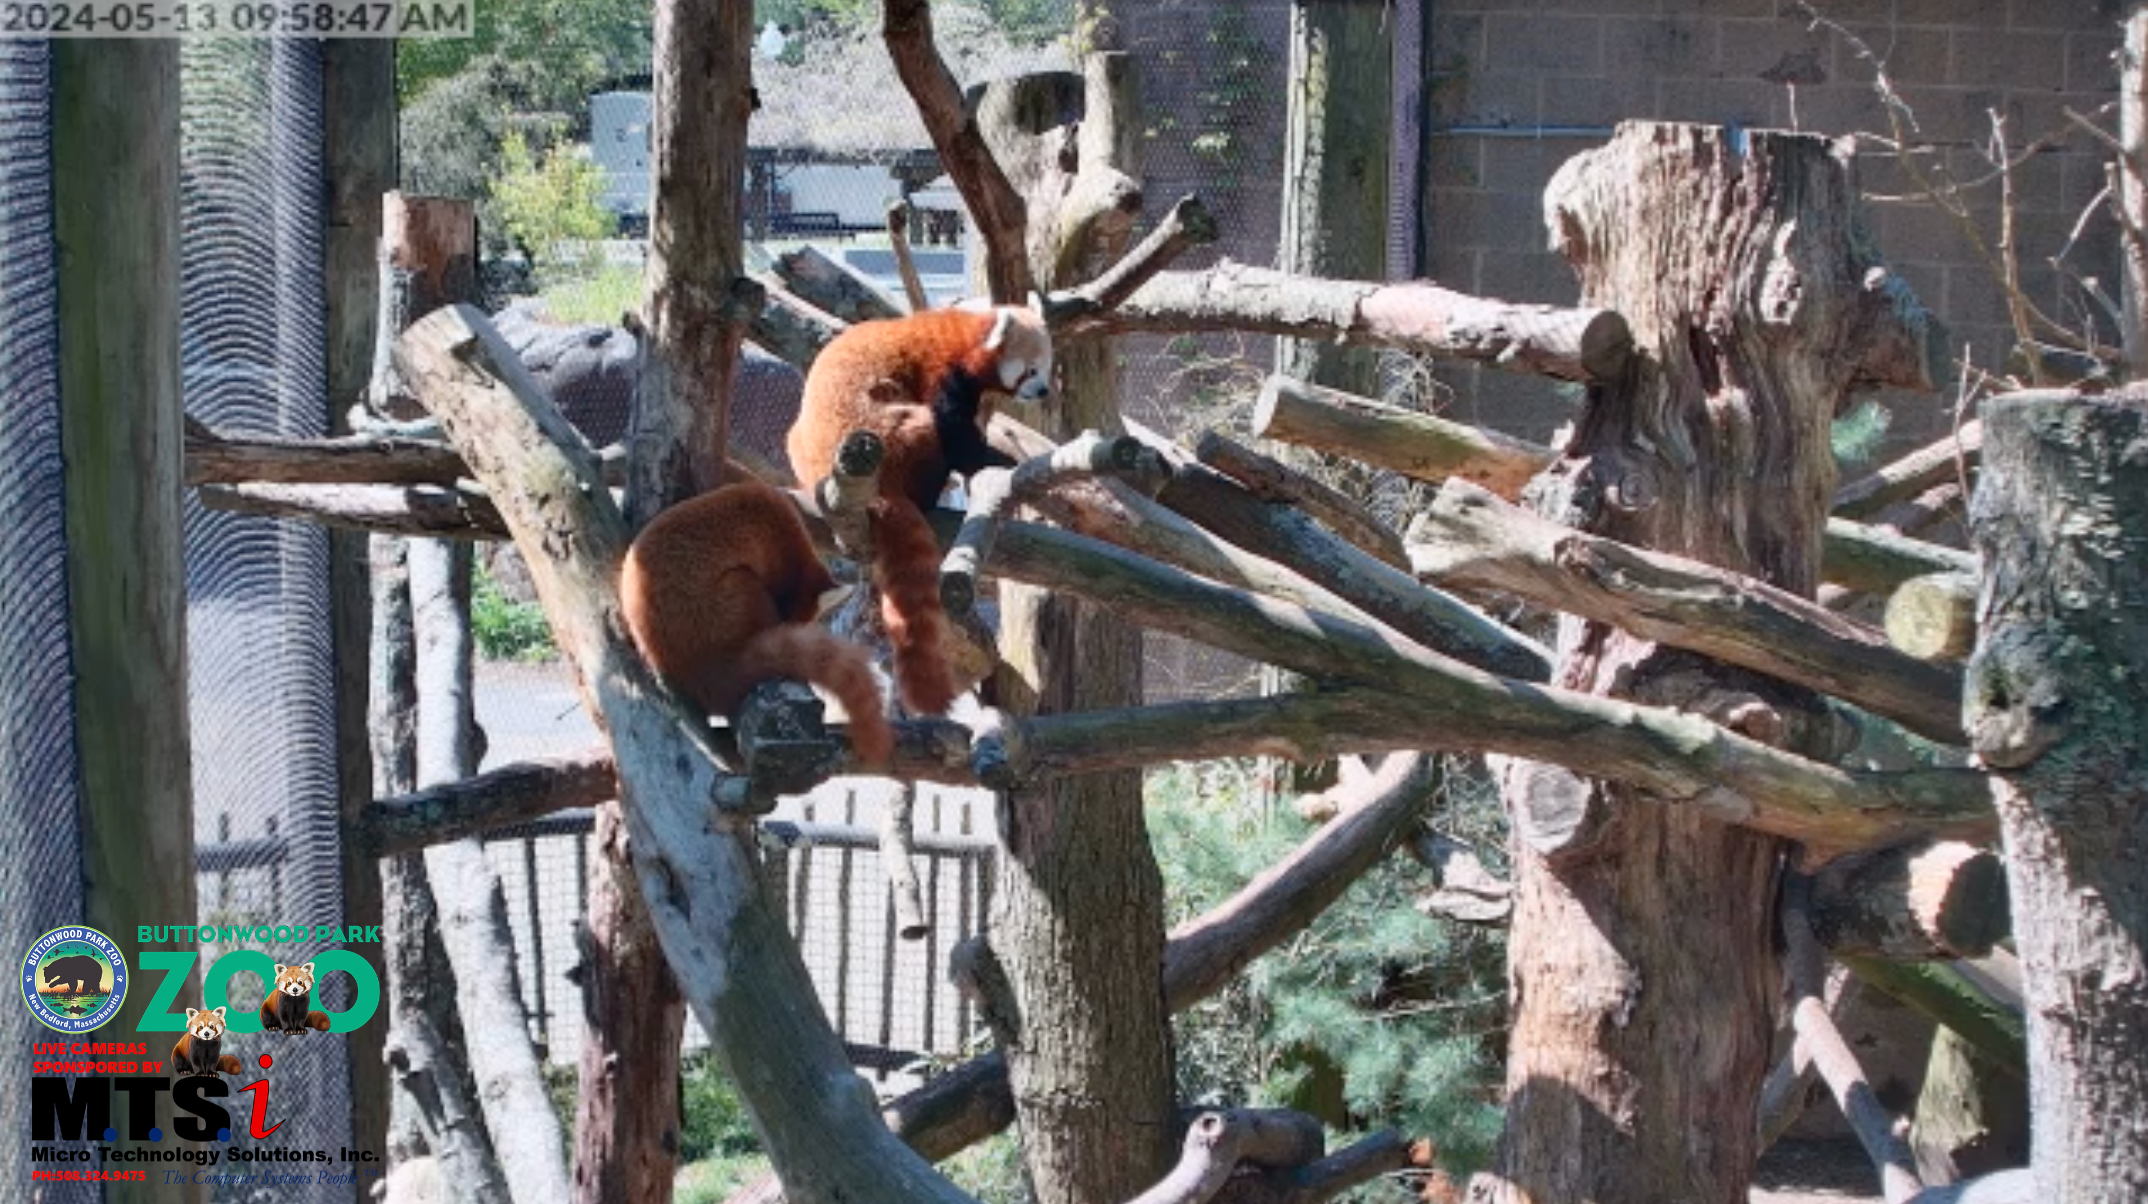 Need a little cuteness break? This New Bedford zoo might have the answer.